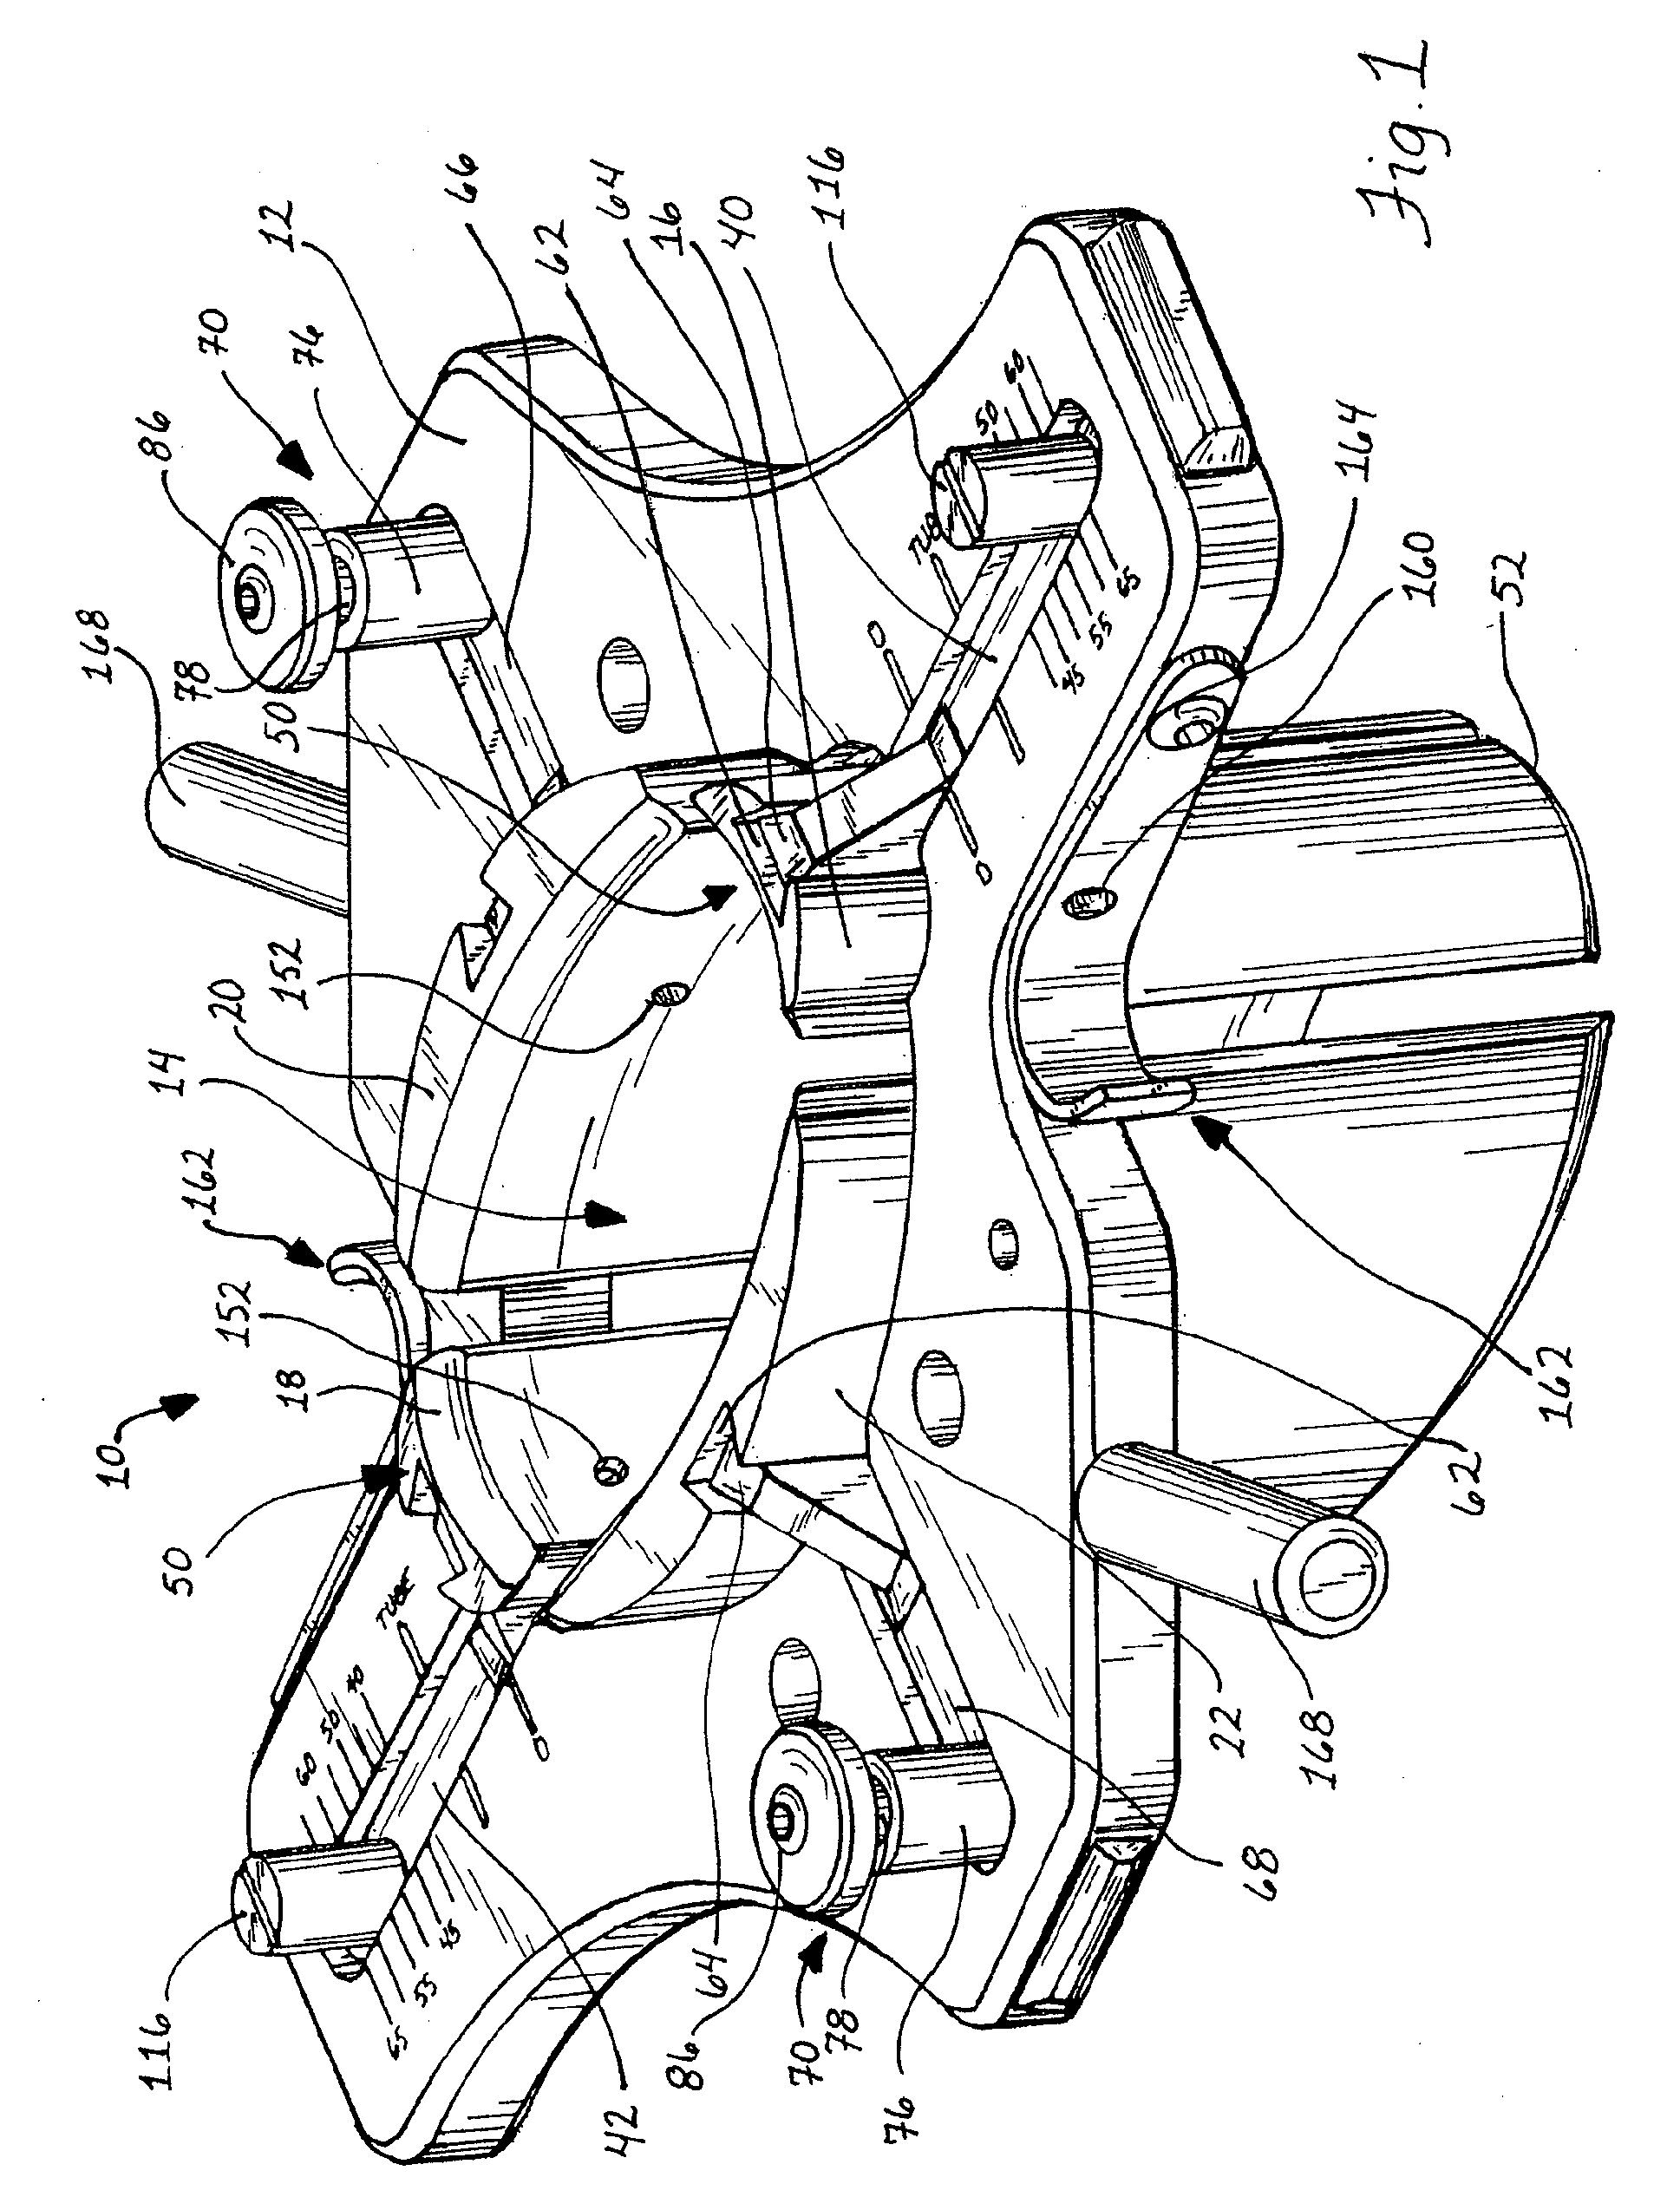 Retraction Apparatus And Method Of Use